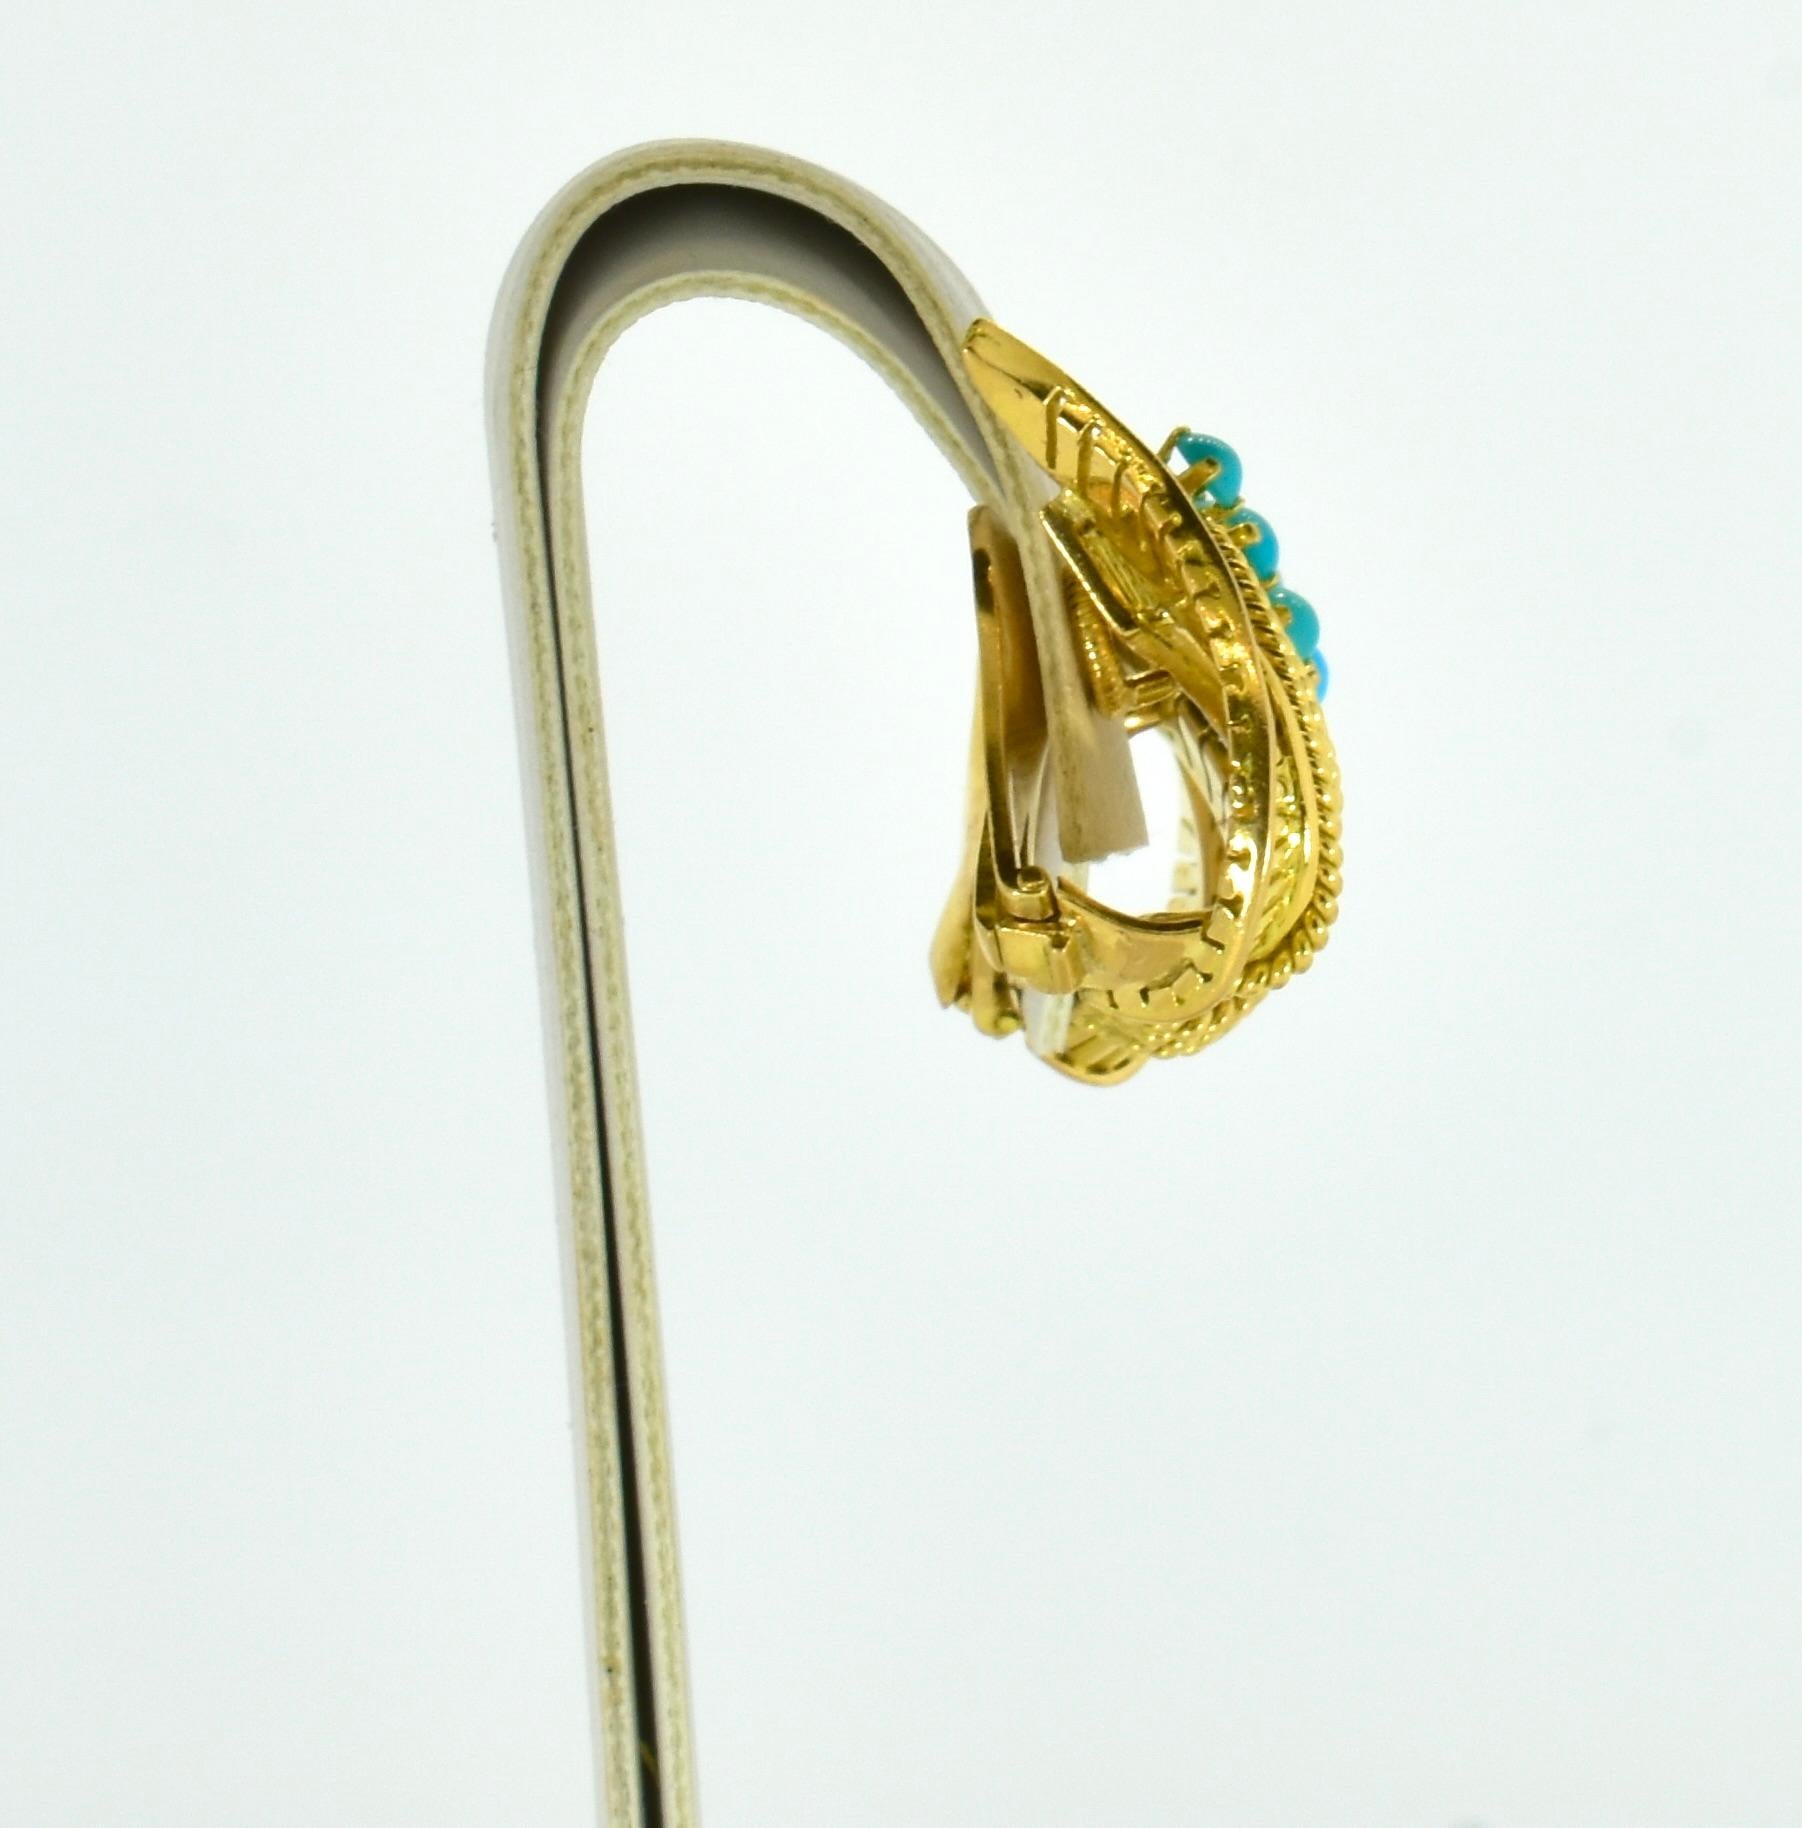 18K Yellow Gold Earrings with Fine Turquoise in a Leaf Motif, Vintage , c. 1950. For Sale 2